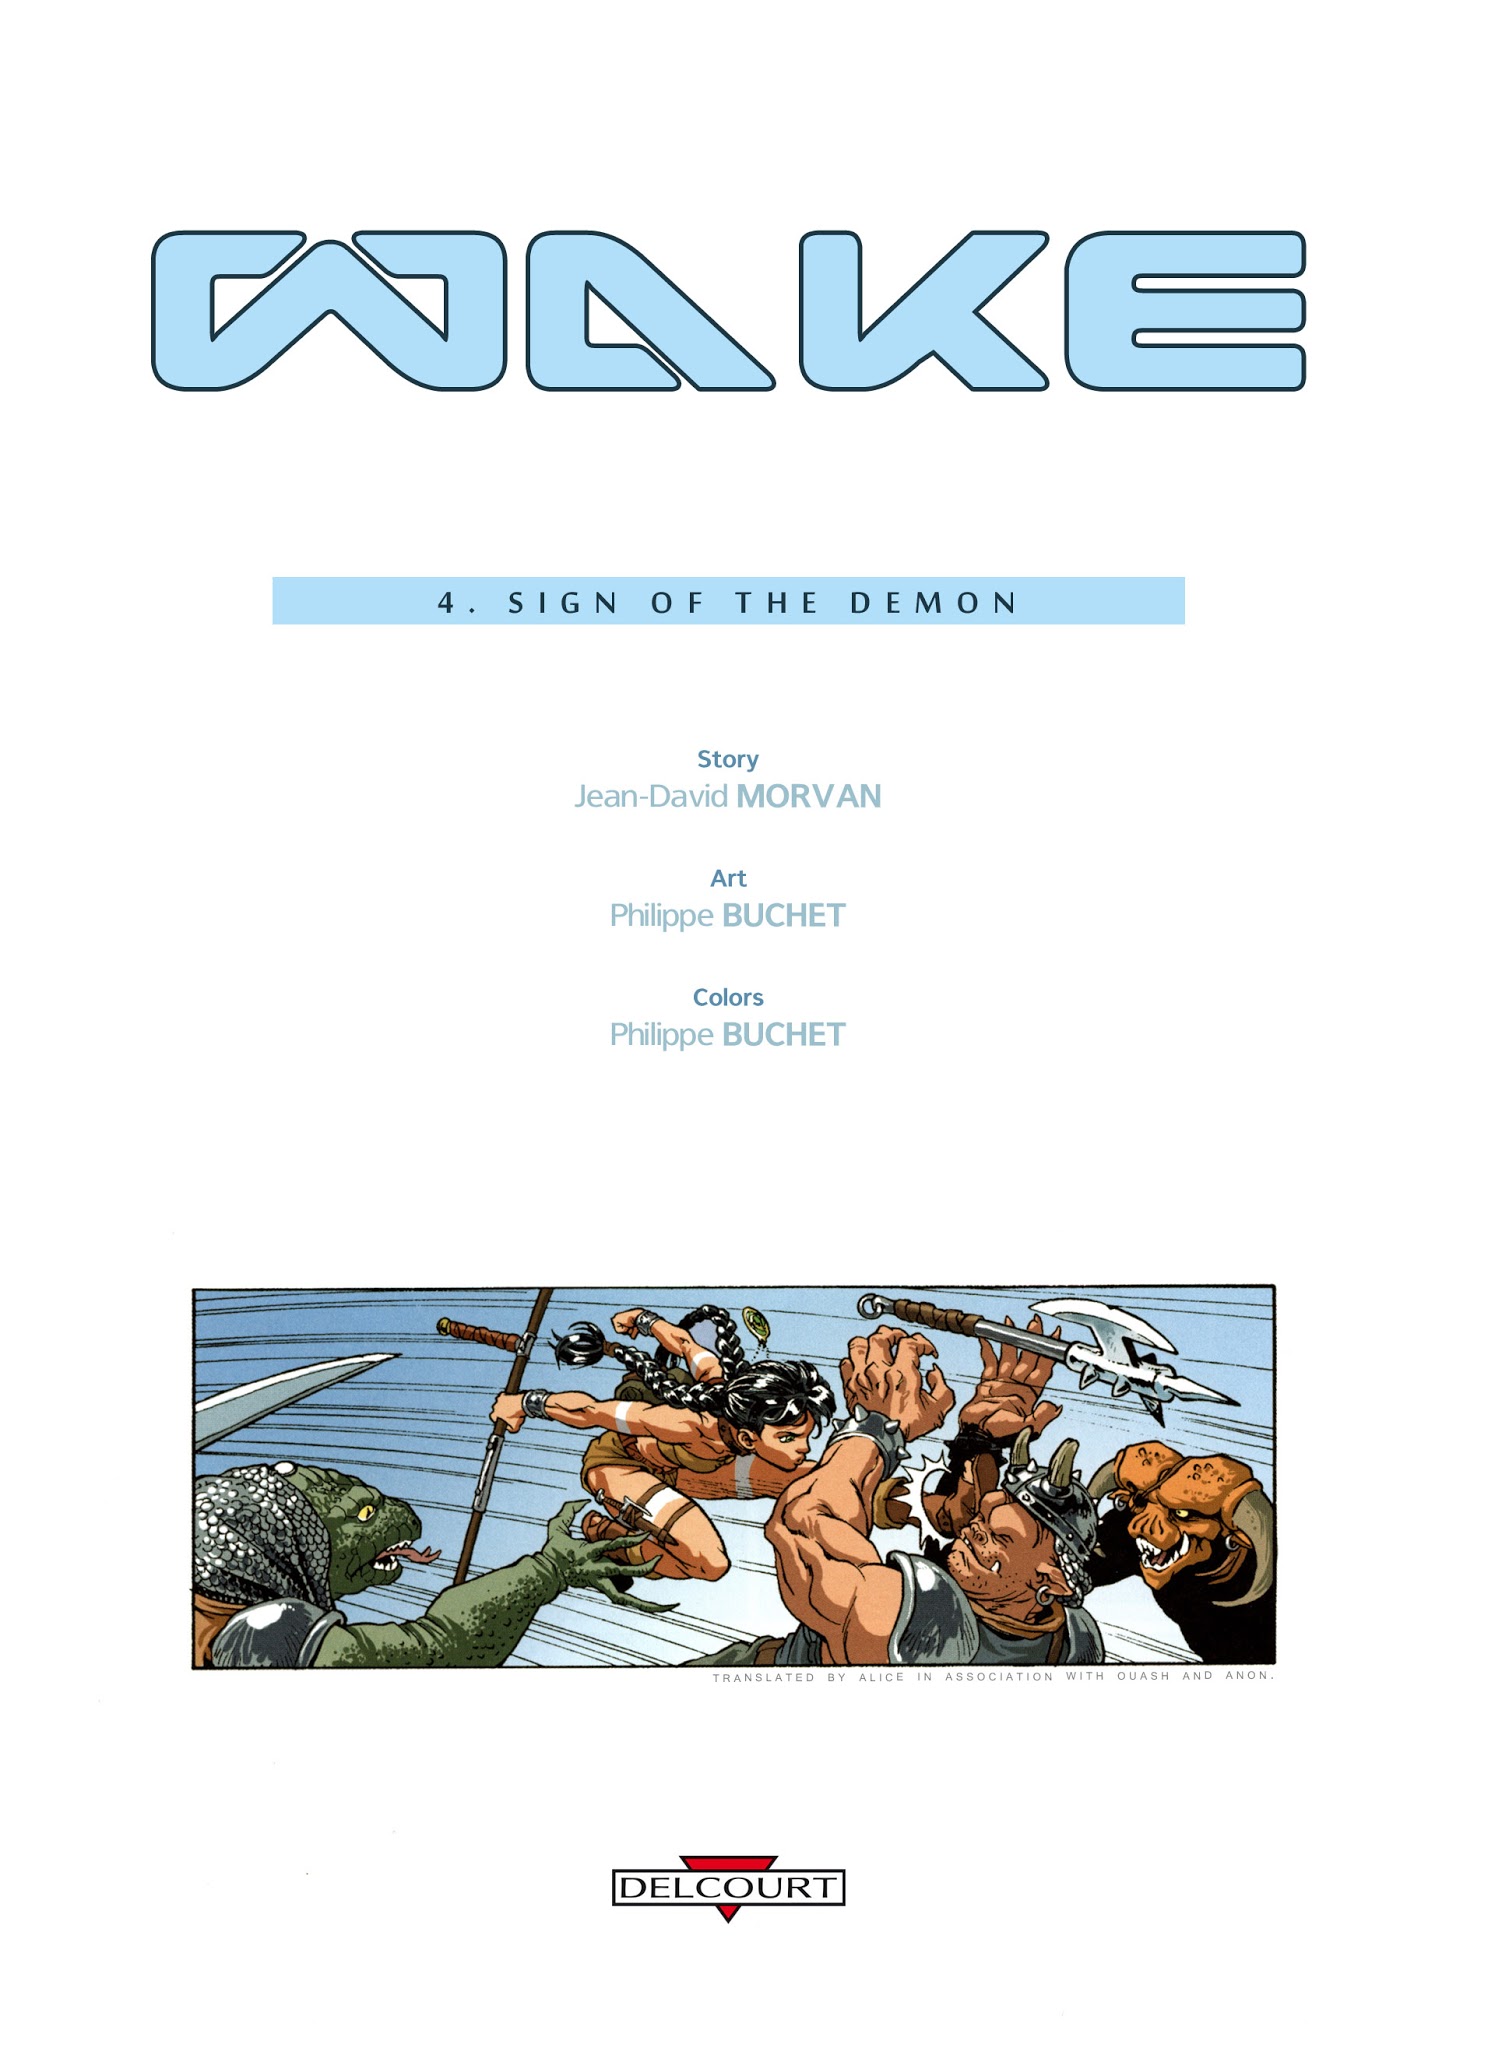 Read online Wake comic -  Issue #4 - 2